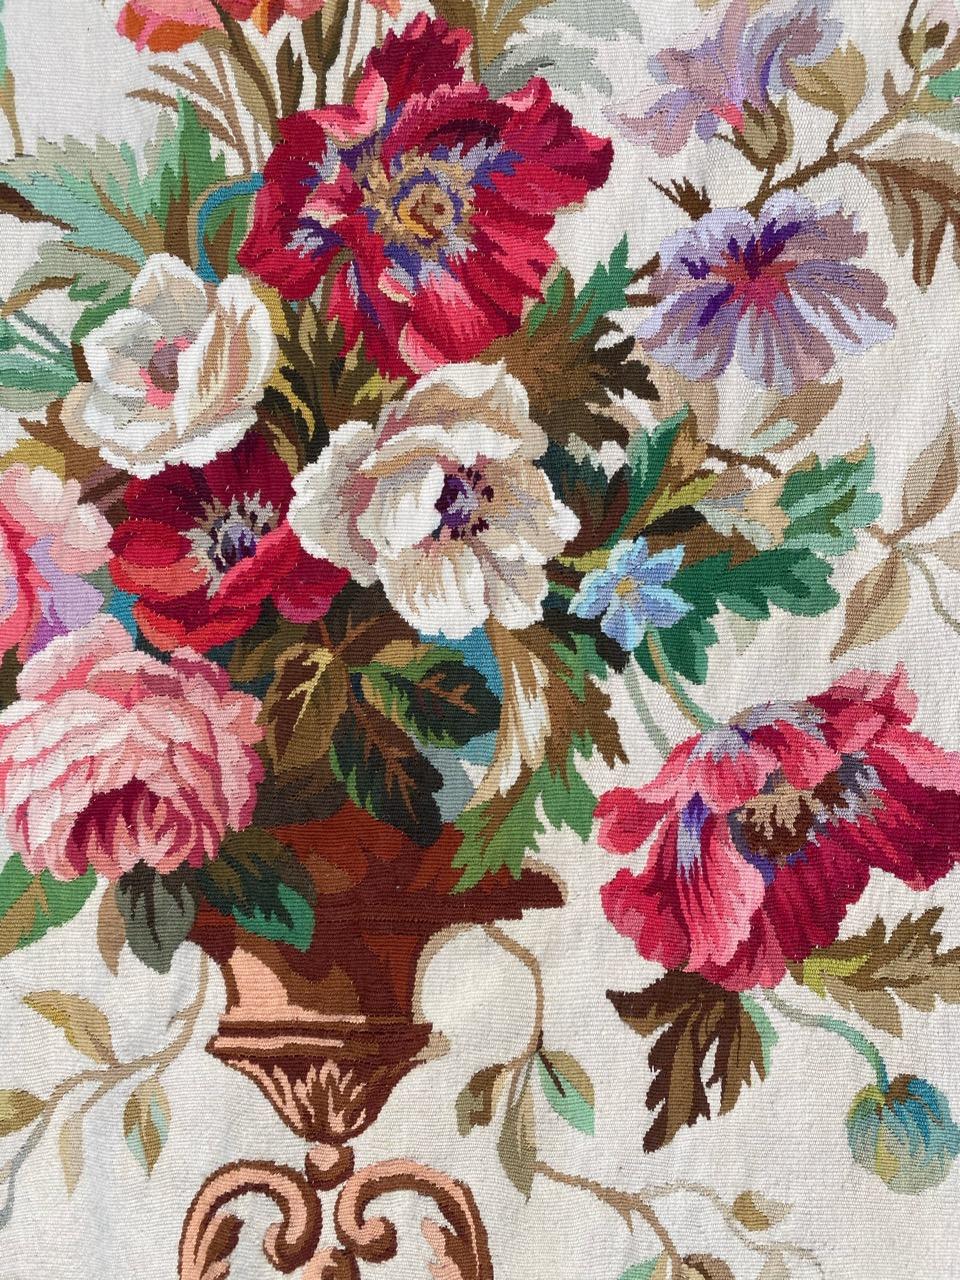 Hand-Woven Bobyrug’s Nice Antique French Aubusson Tapestry Panel